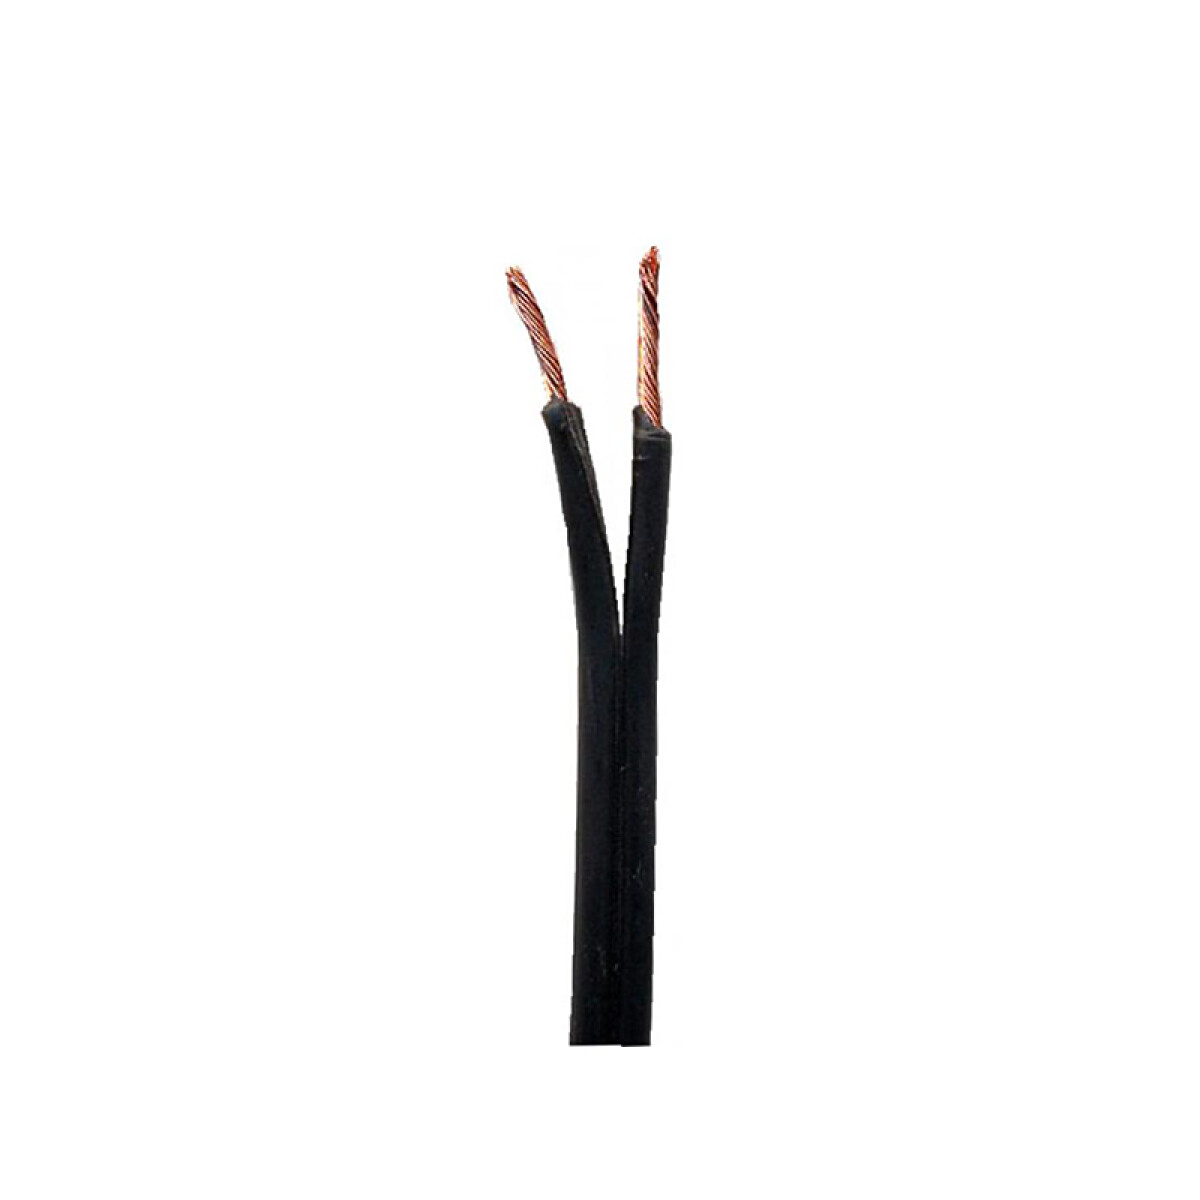 Cable gemelo negro 2x0,75mm² - Rollo 100 mts. - C95828 